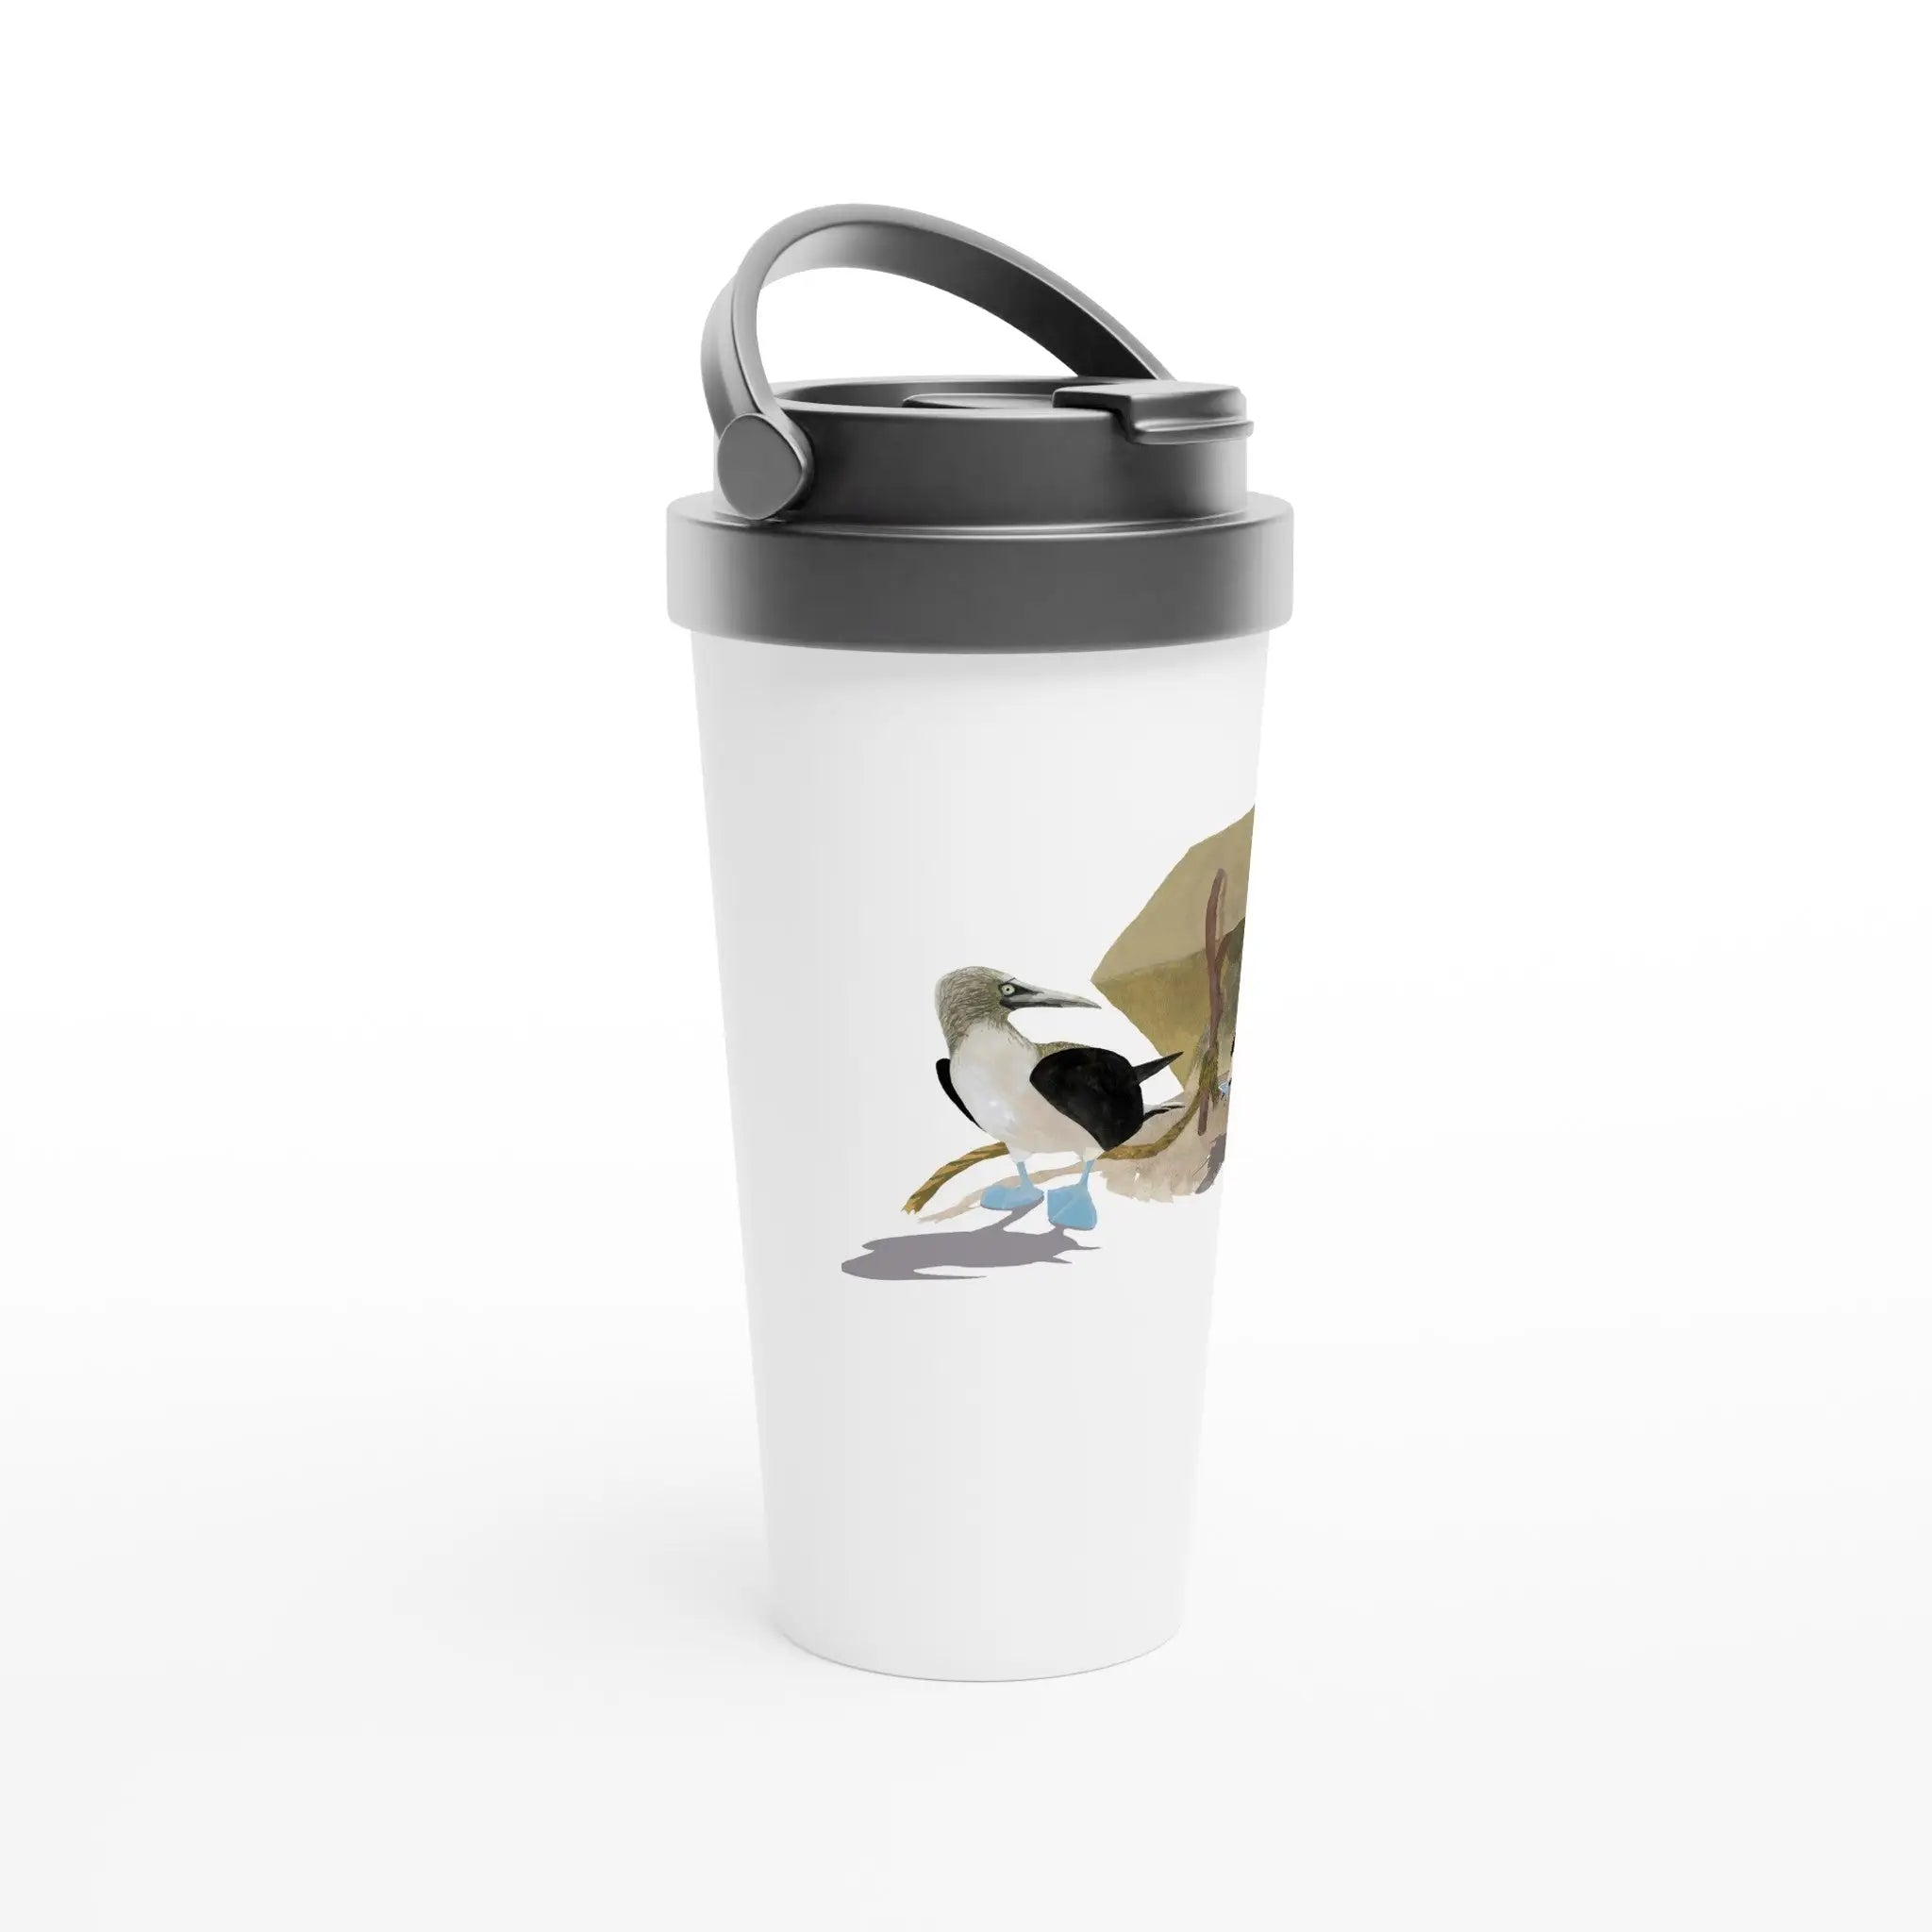 White travel mug with black handle and cartoon character from Booby Trap